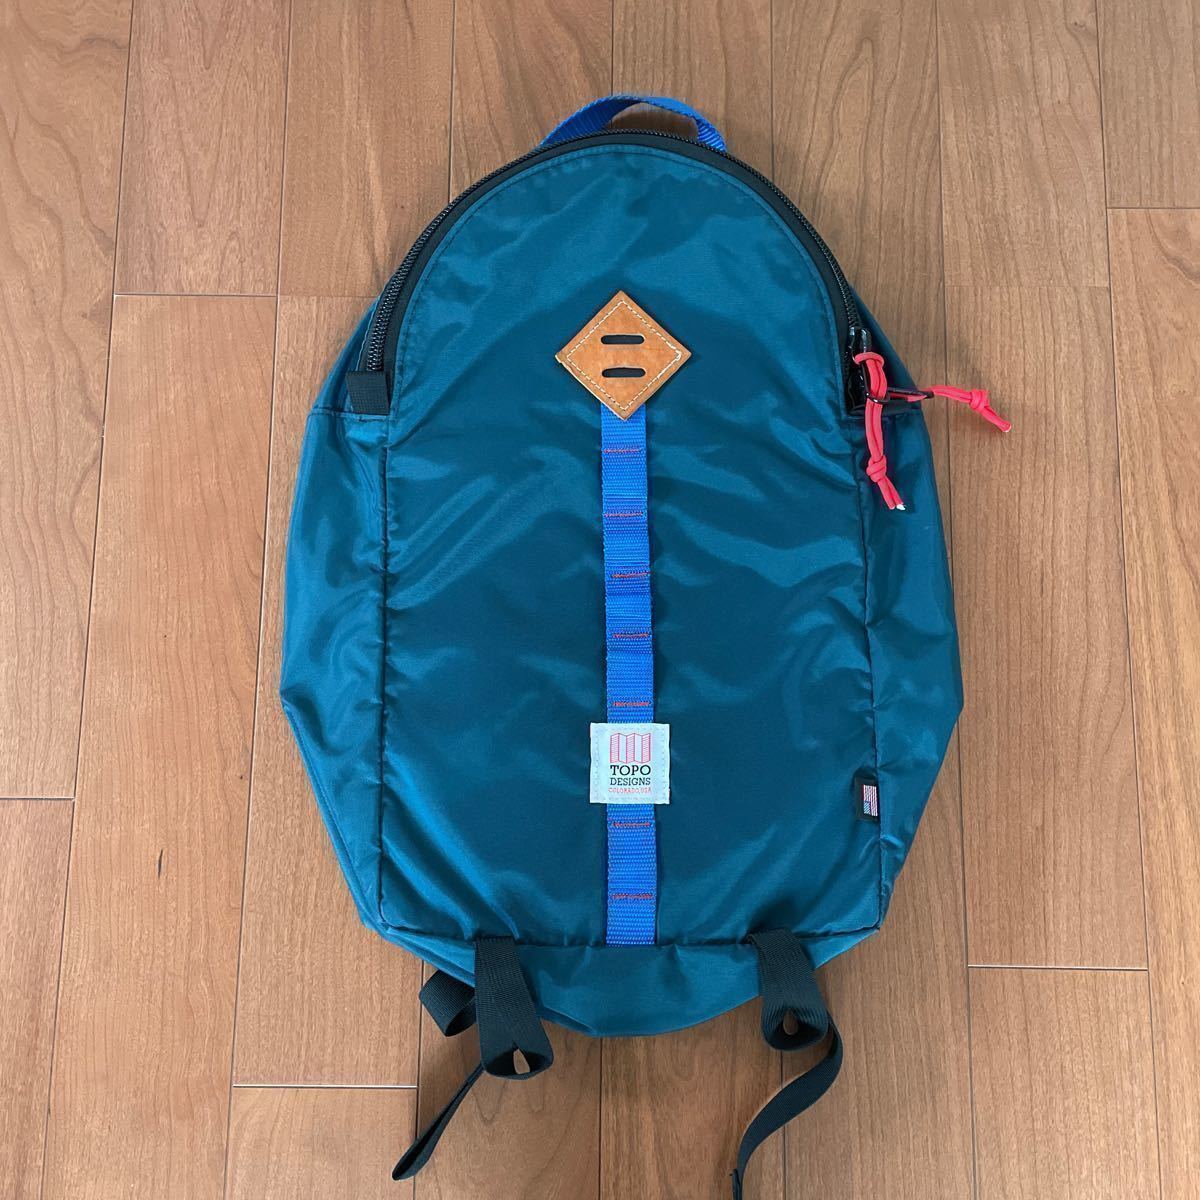 TOPO DESIGNS トポデザイン アメリカ製バックパック リュック 美品